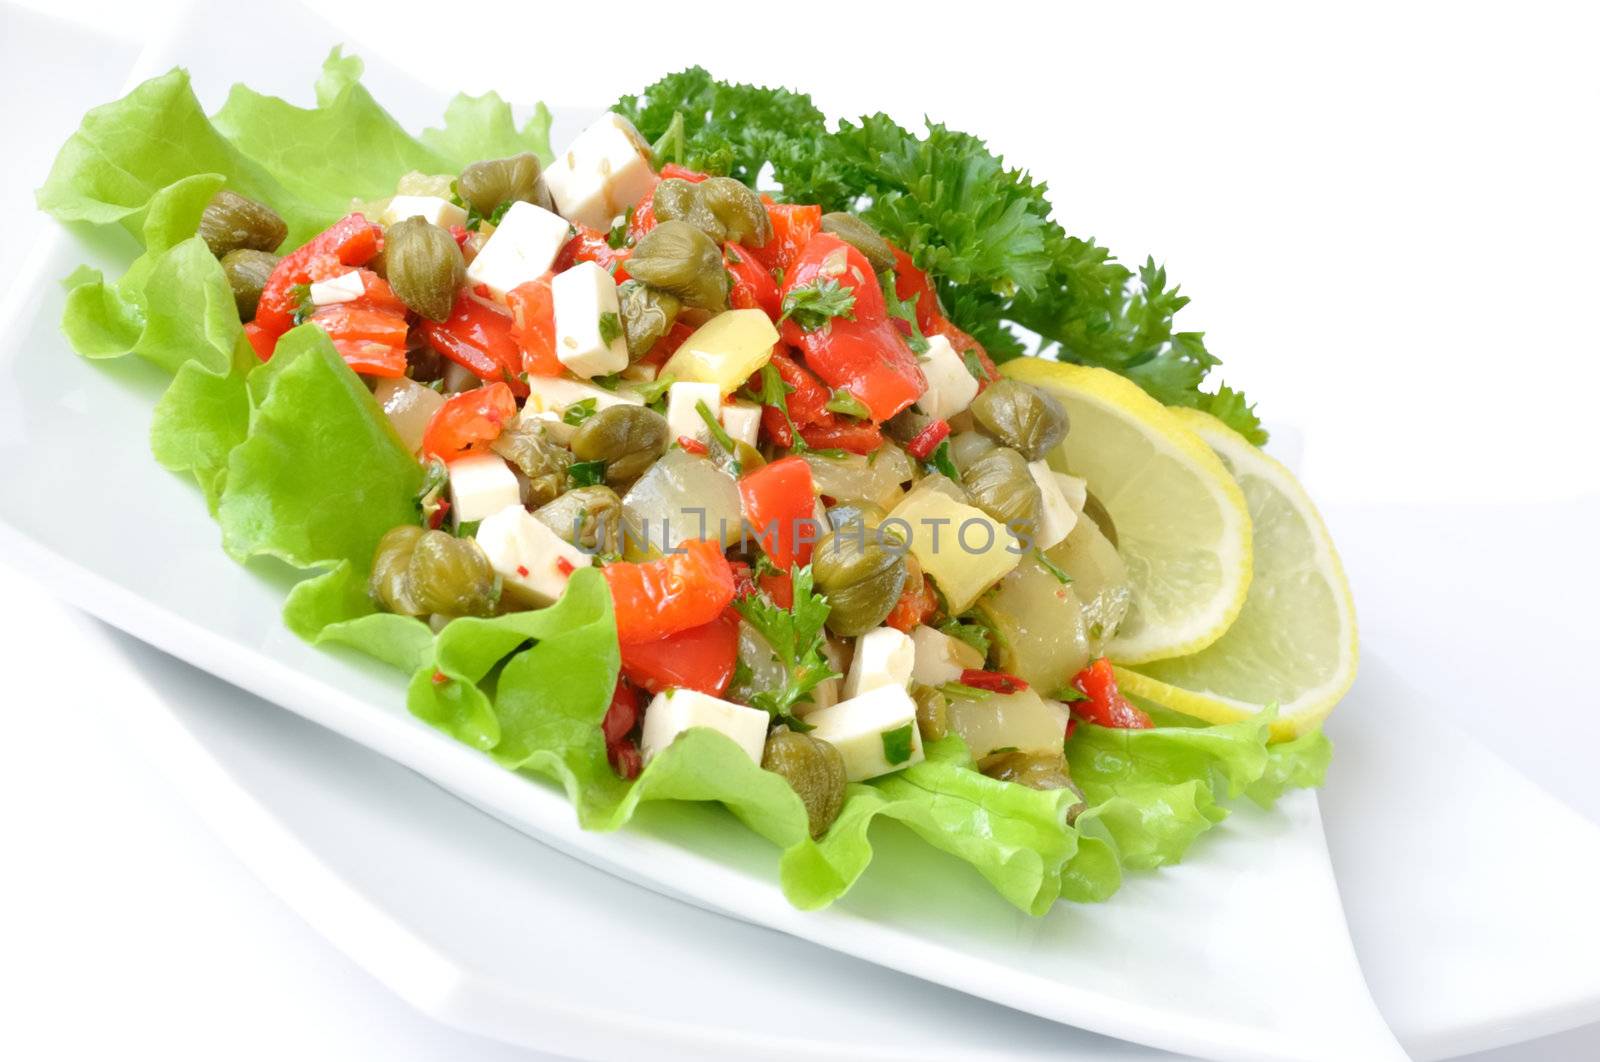 Salad with peppers and capers by Apolonia